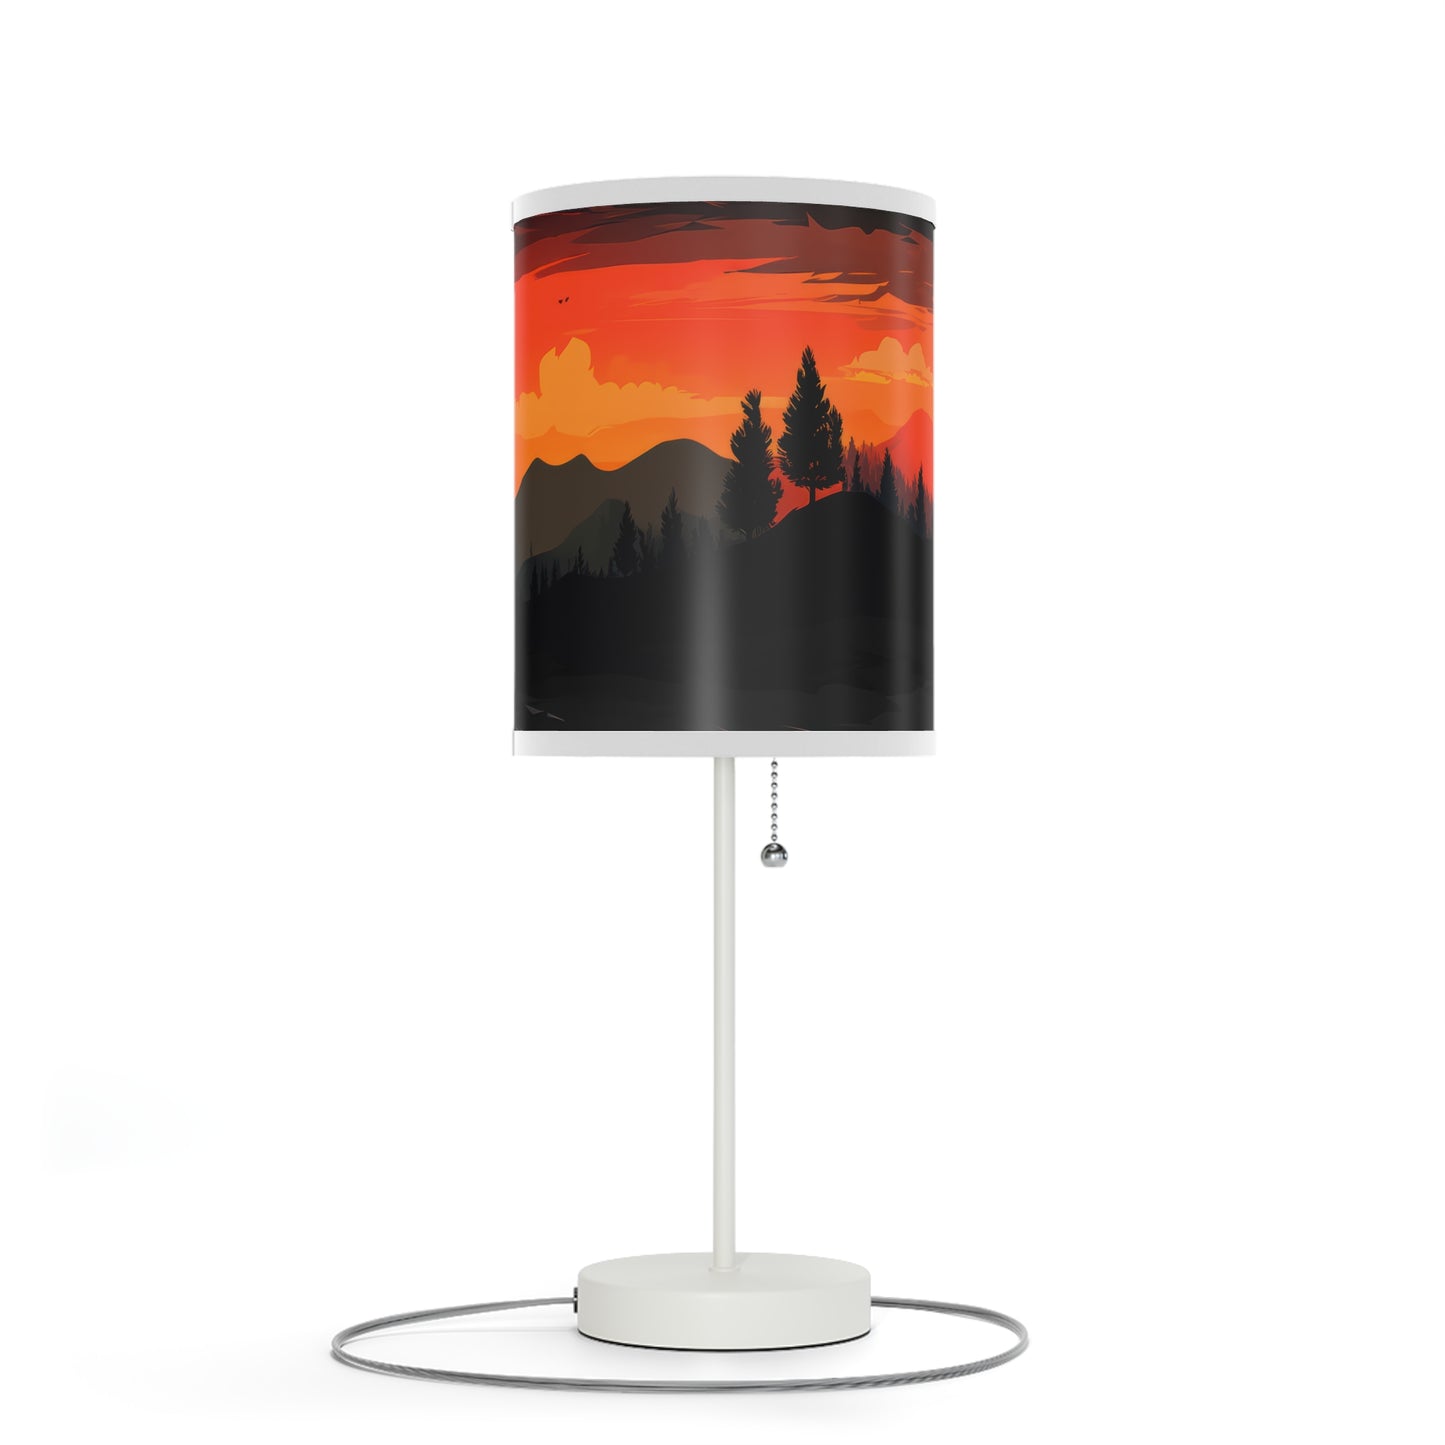 Sunset Silhouette - Lamp captures indoor sunset magic. With a realistic print of mountains and sunset, it bathes rooms in inviting hues. Radiant yet calming, its soft glow mimics natural sunsets, perfect for winding down. The lamp's 20" × 7" size, solid white steel base, and versatile design make it a charming addition to side tables, work desks, or nightstands.